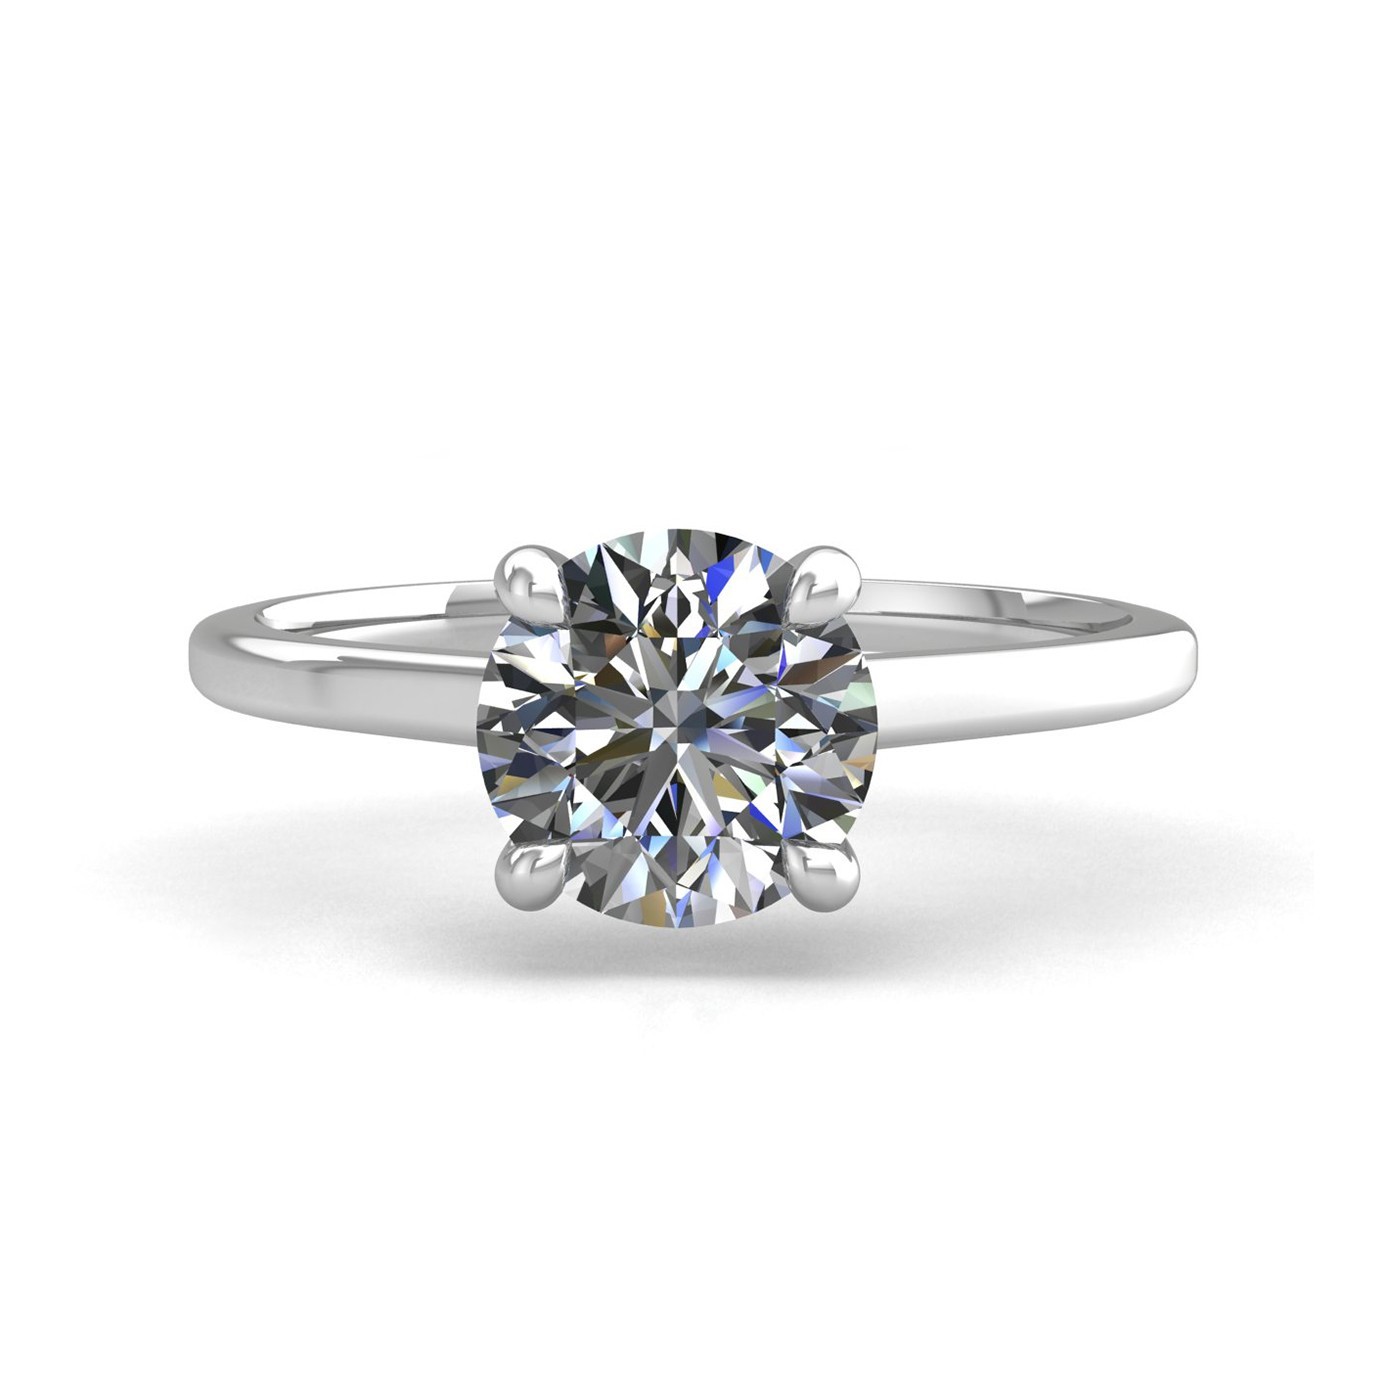 18k white gold 2,50 ct 4 prongs solitaire round cut diamond engagement ring with whisper thin band Photos & images